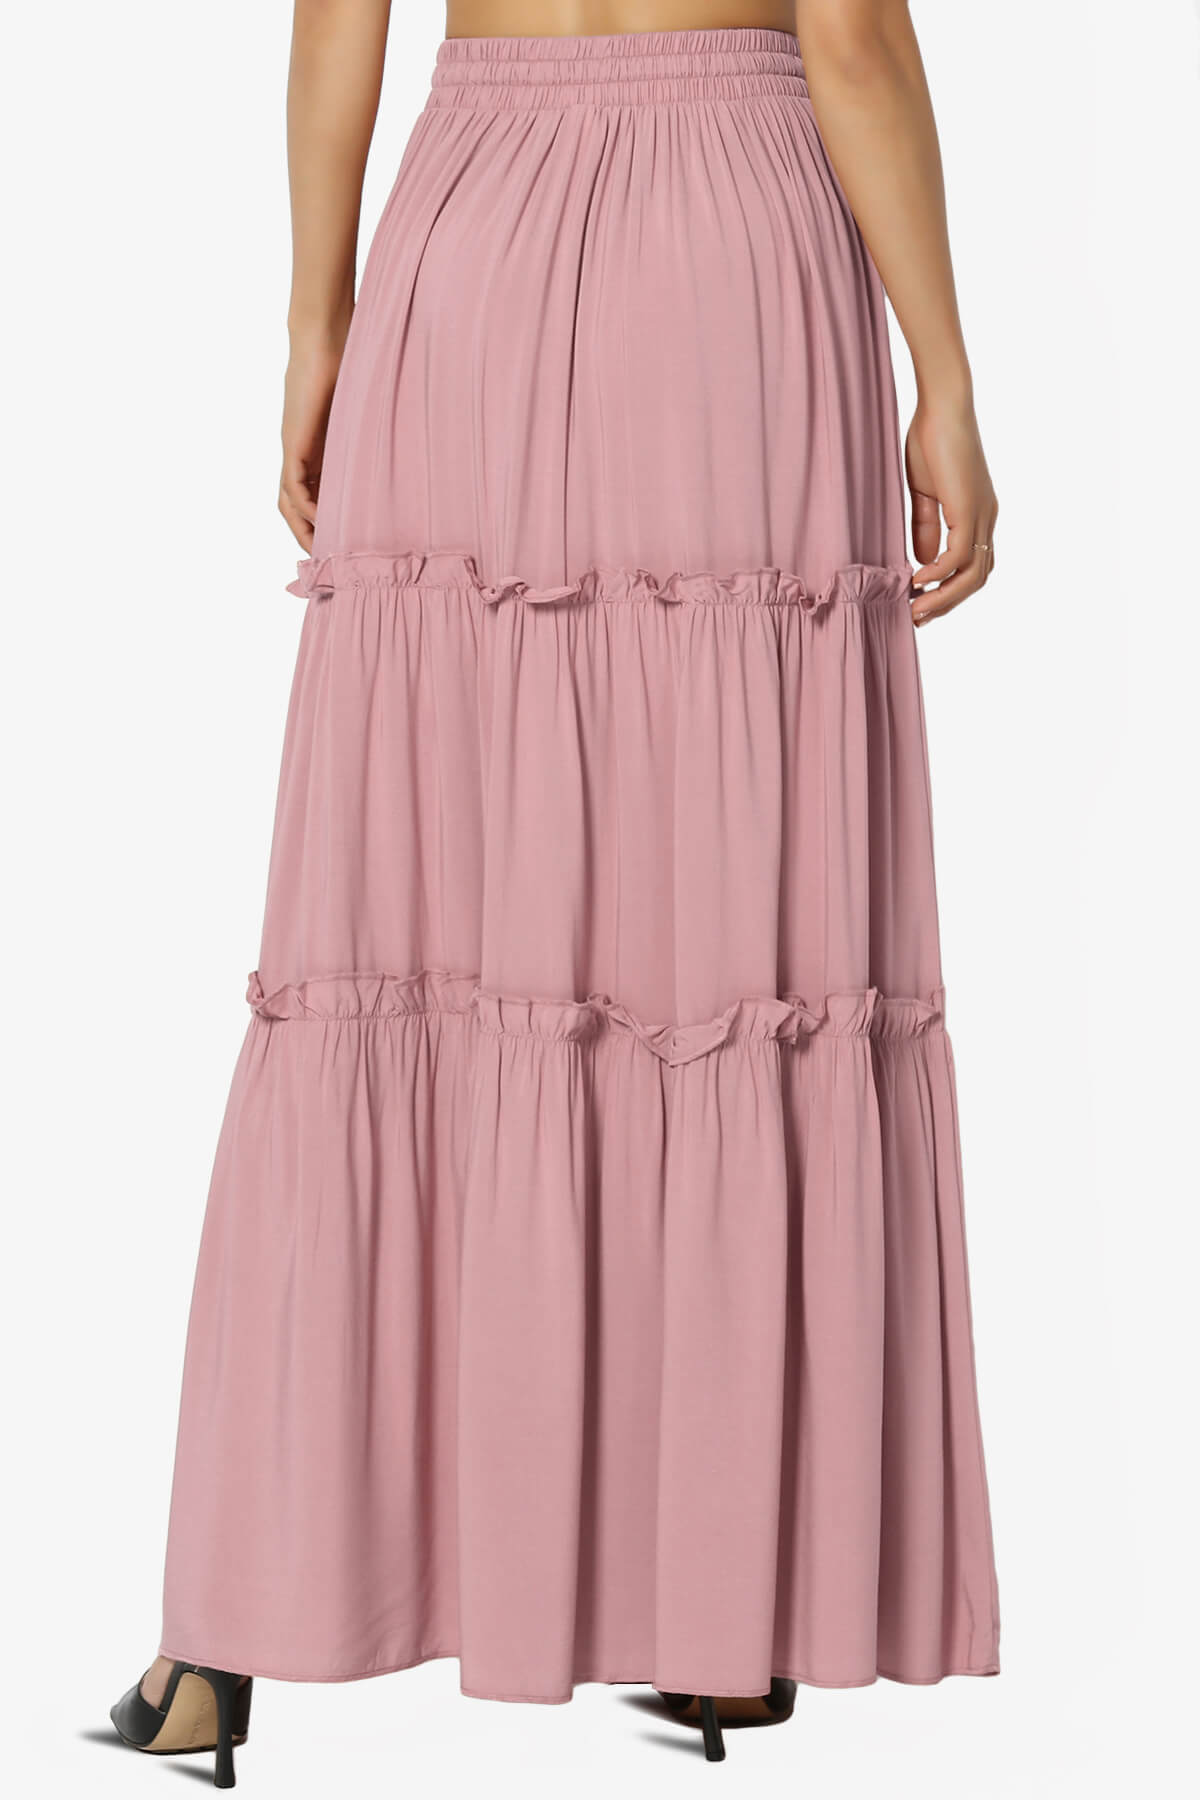 Load image into Gallery viewer, Kelton Ruffle Tiered Woven Maxi Skirt LIGHT ROSE_2
